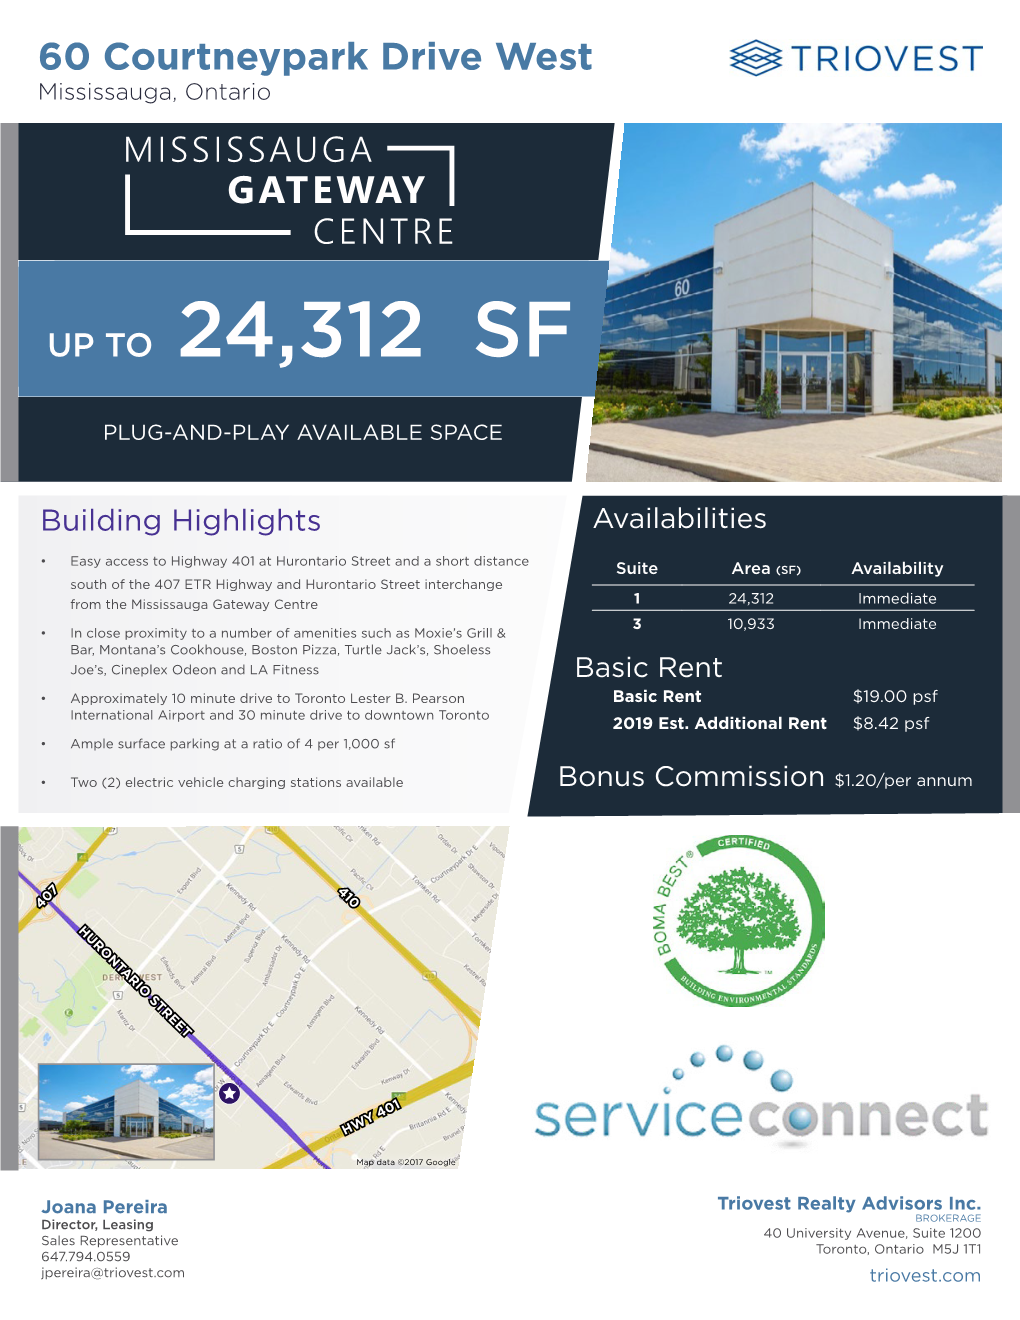 Up to 24,312 Sf